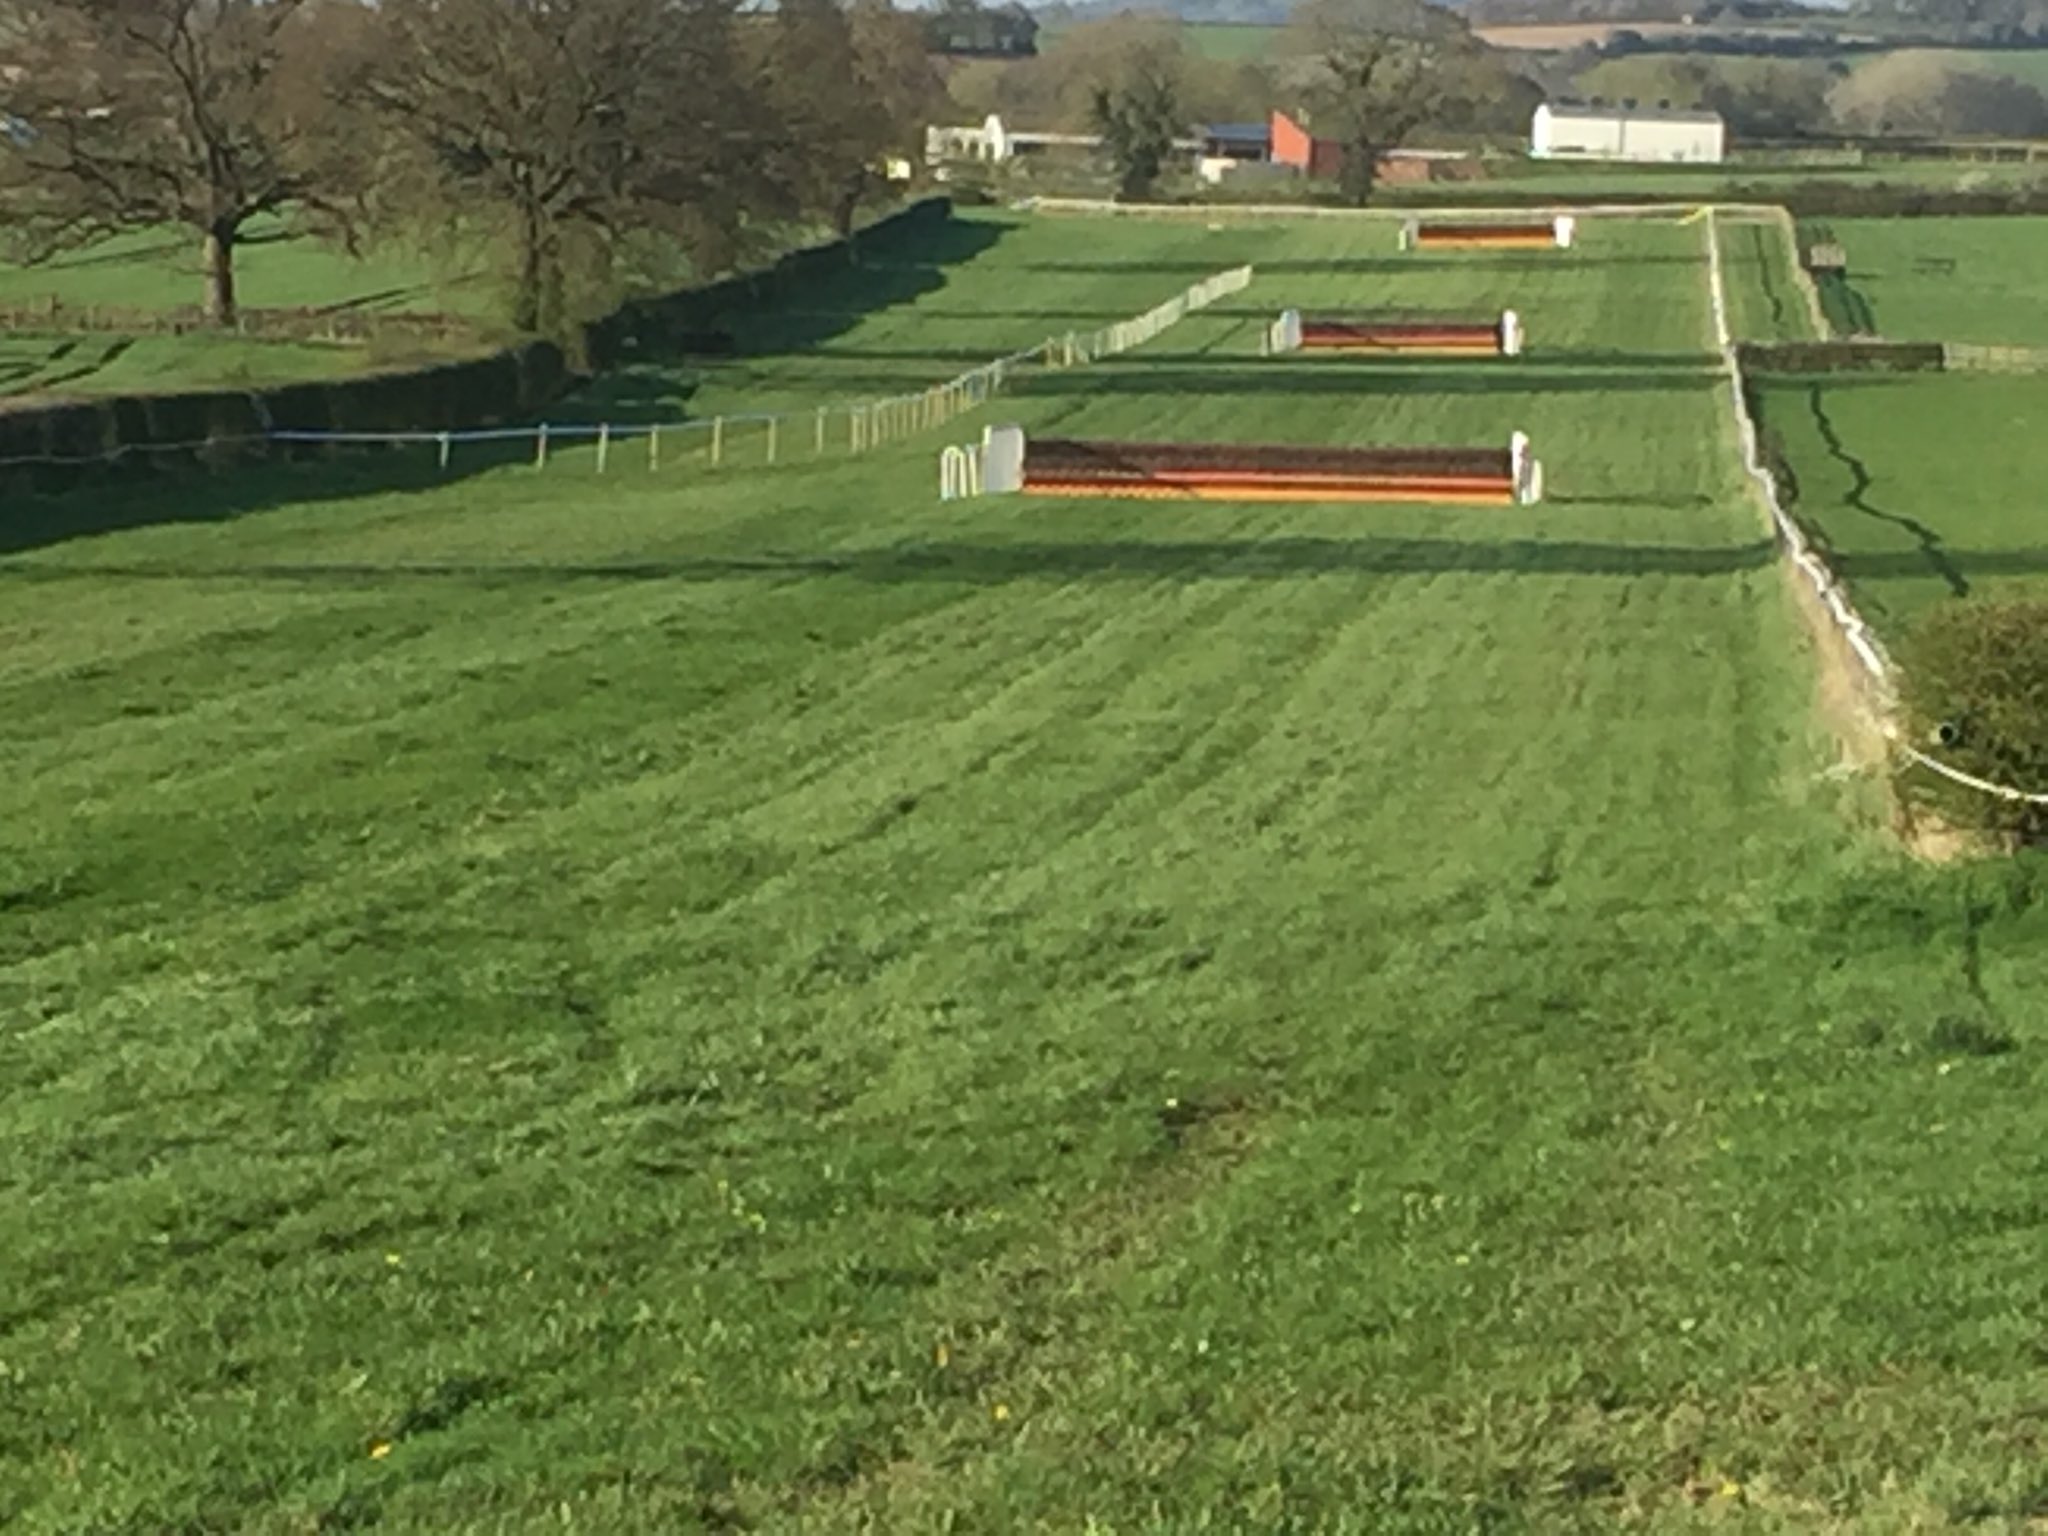 Going Report: Wheatland Point-to-Point 12/05/18 – First Race 2pm